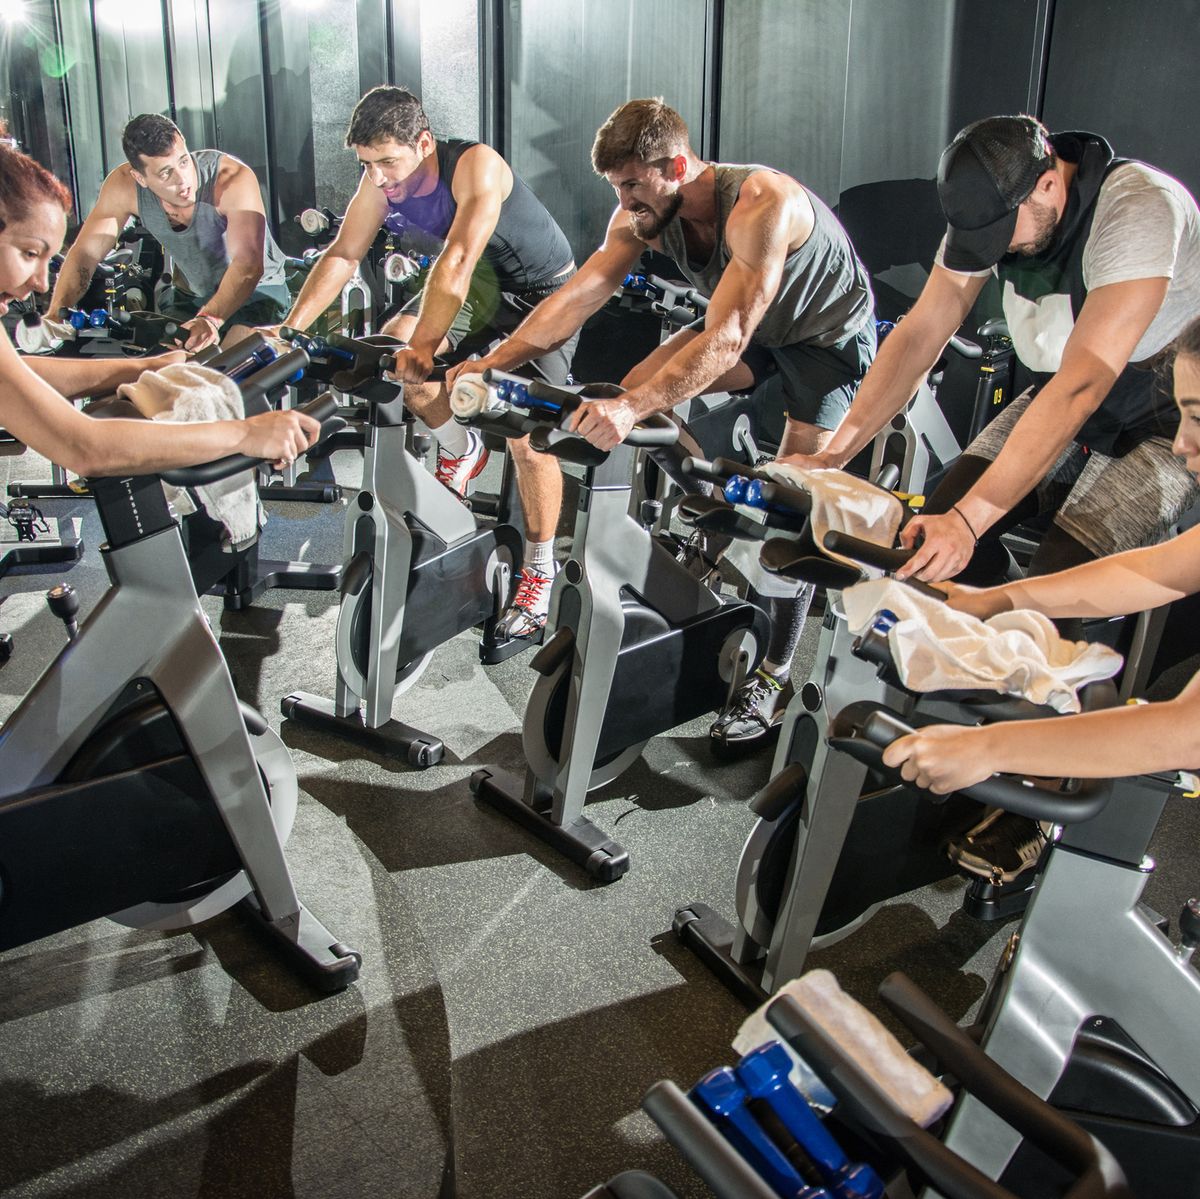 Spin Class Workout - 3 Tips to Help You Get the Most Out of Spin Class